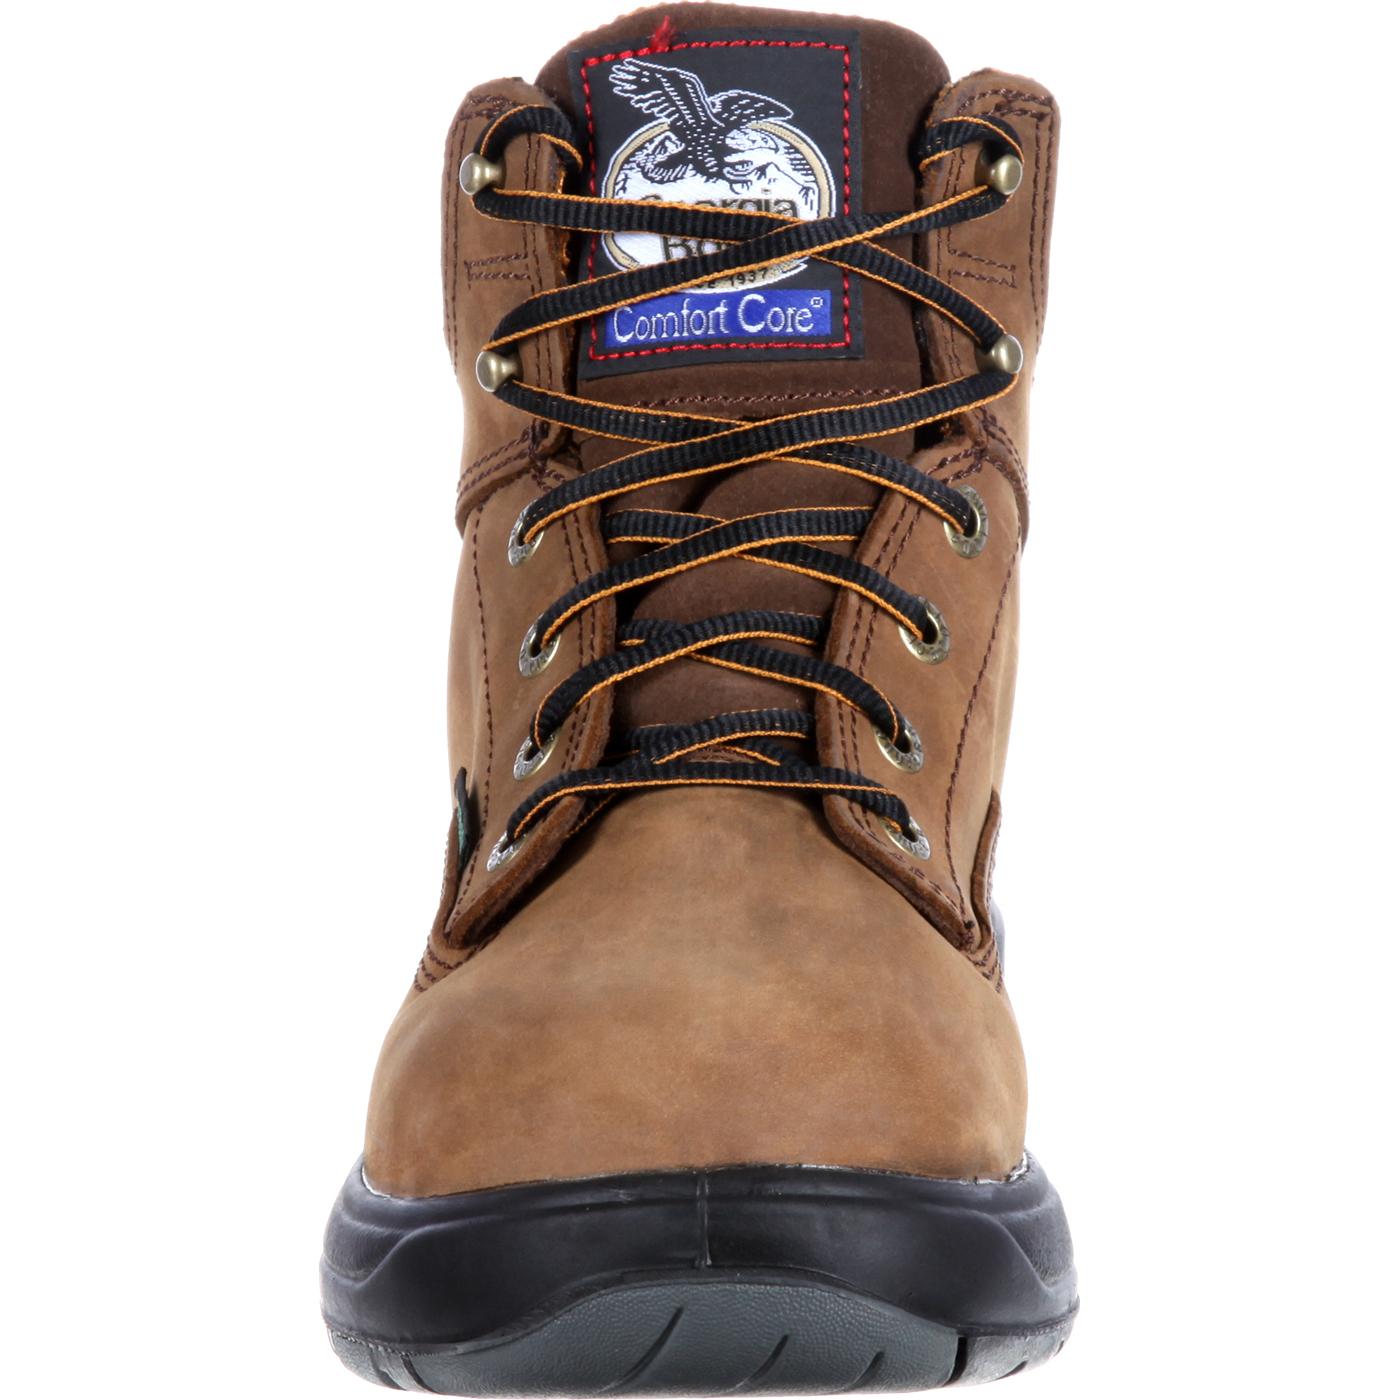 Georgia FLXpoint Waterproof Composite Toe Boots - Style #G6644